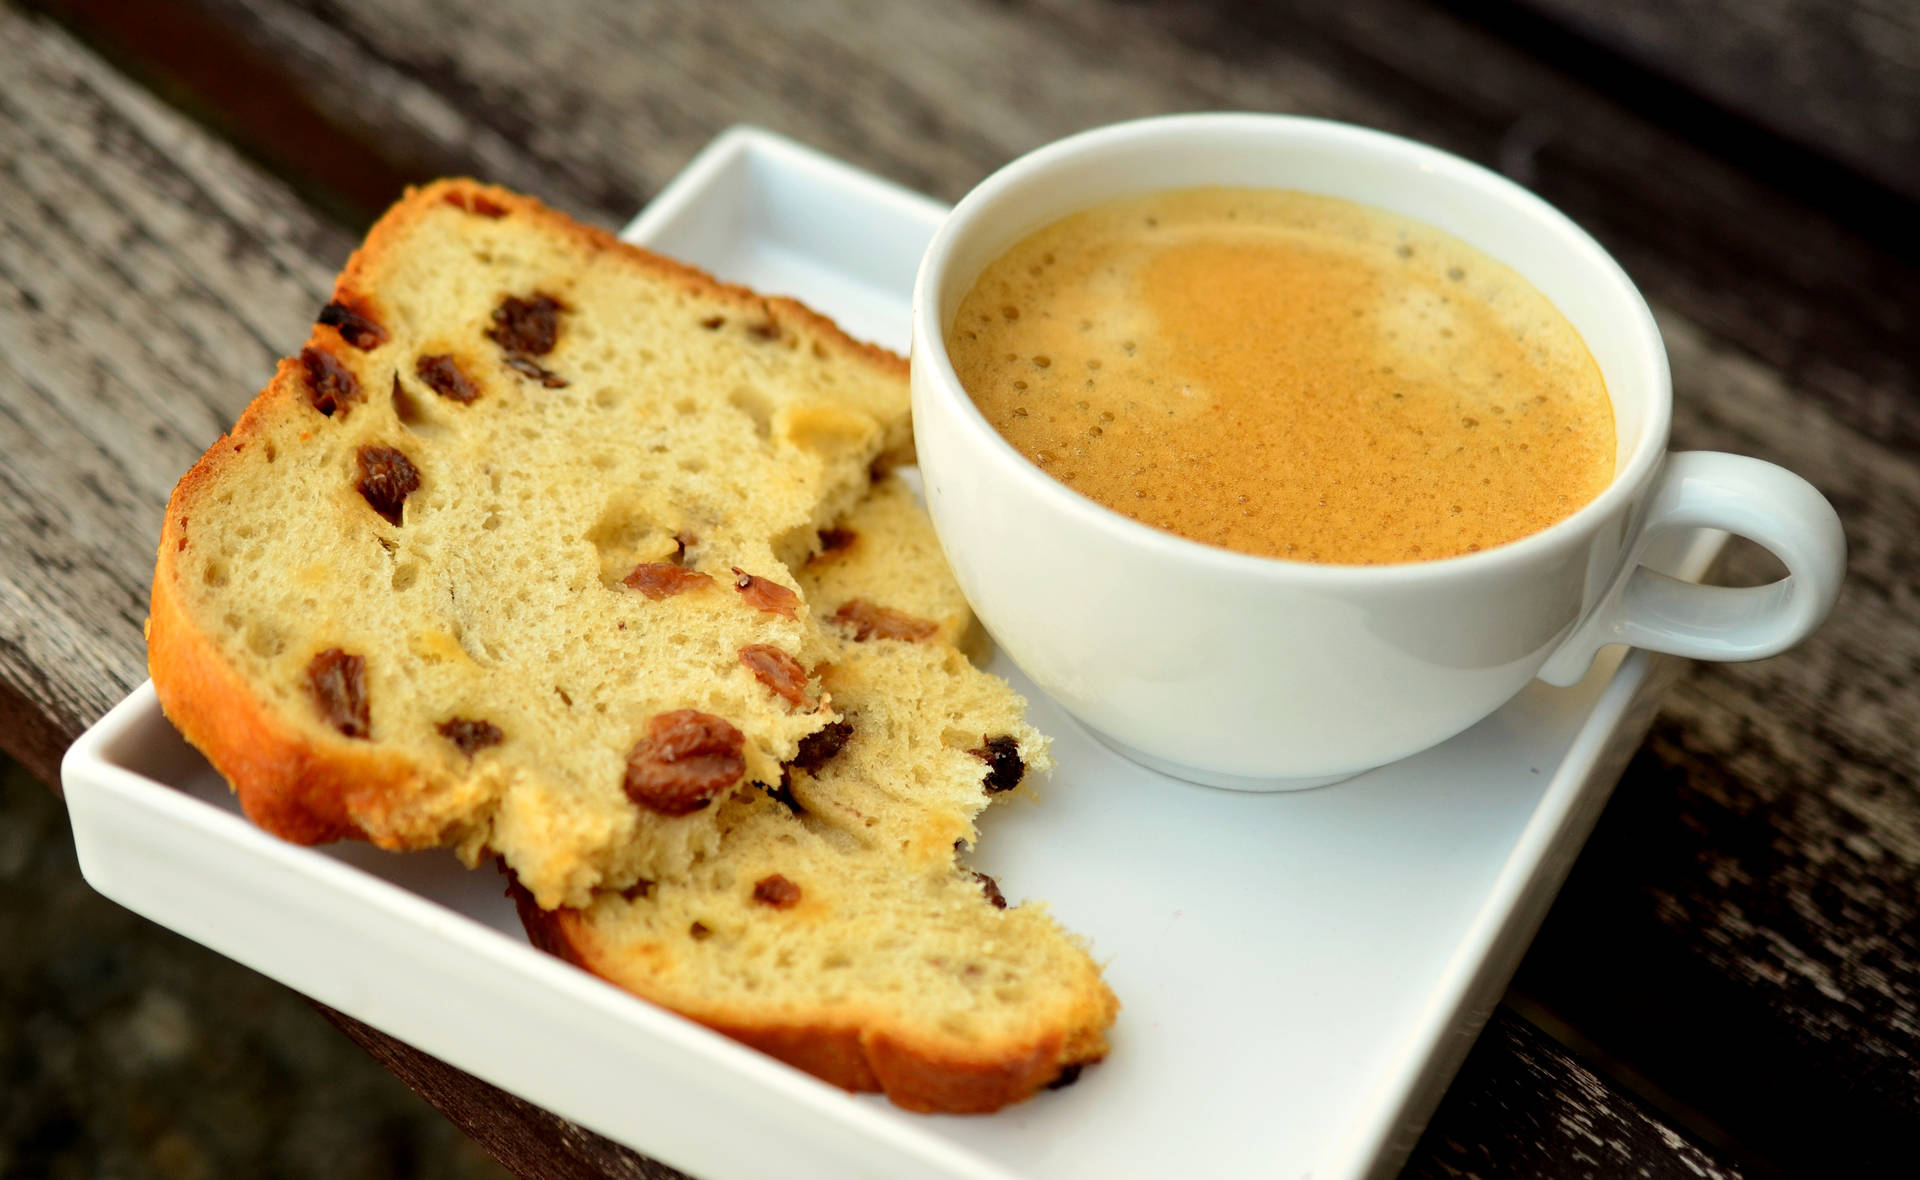 Enjoy a slice of freshly-baked coffee and raisin loaf! Wallpaper